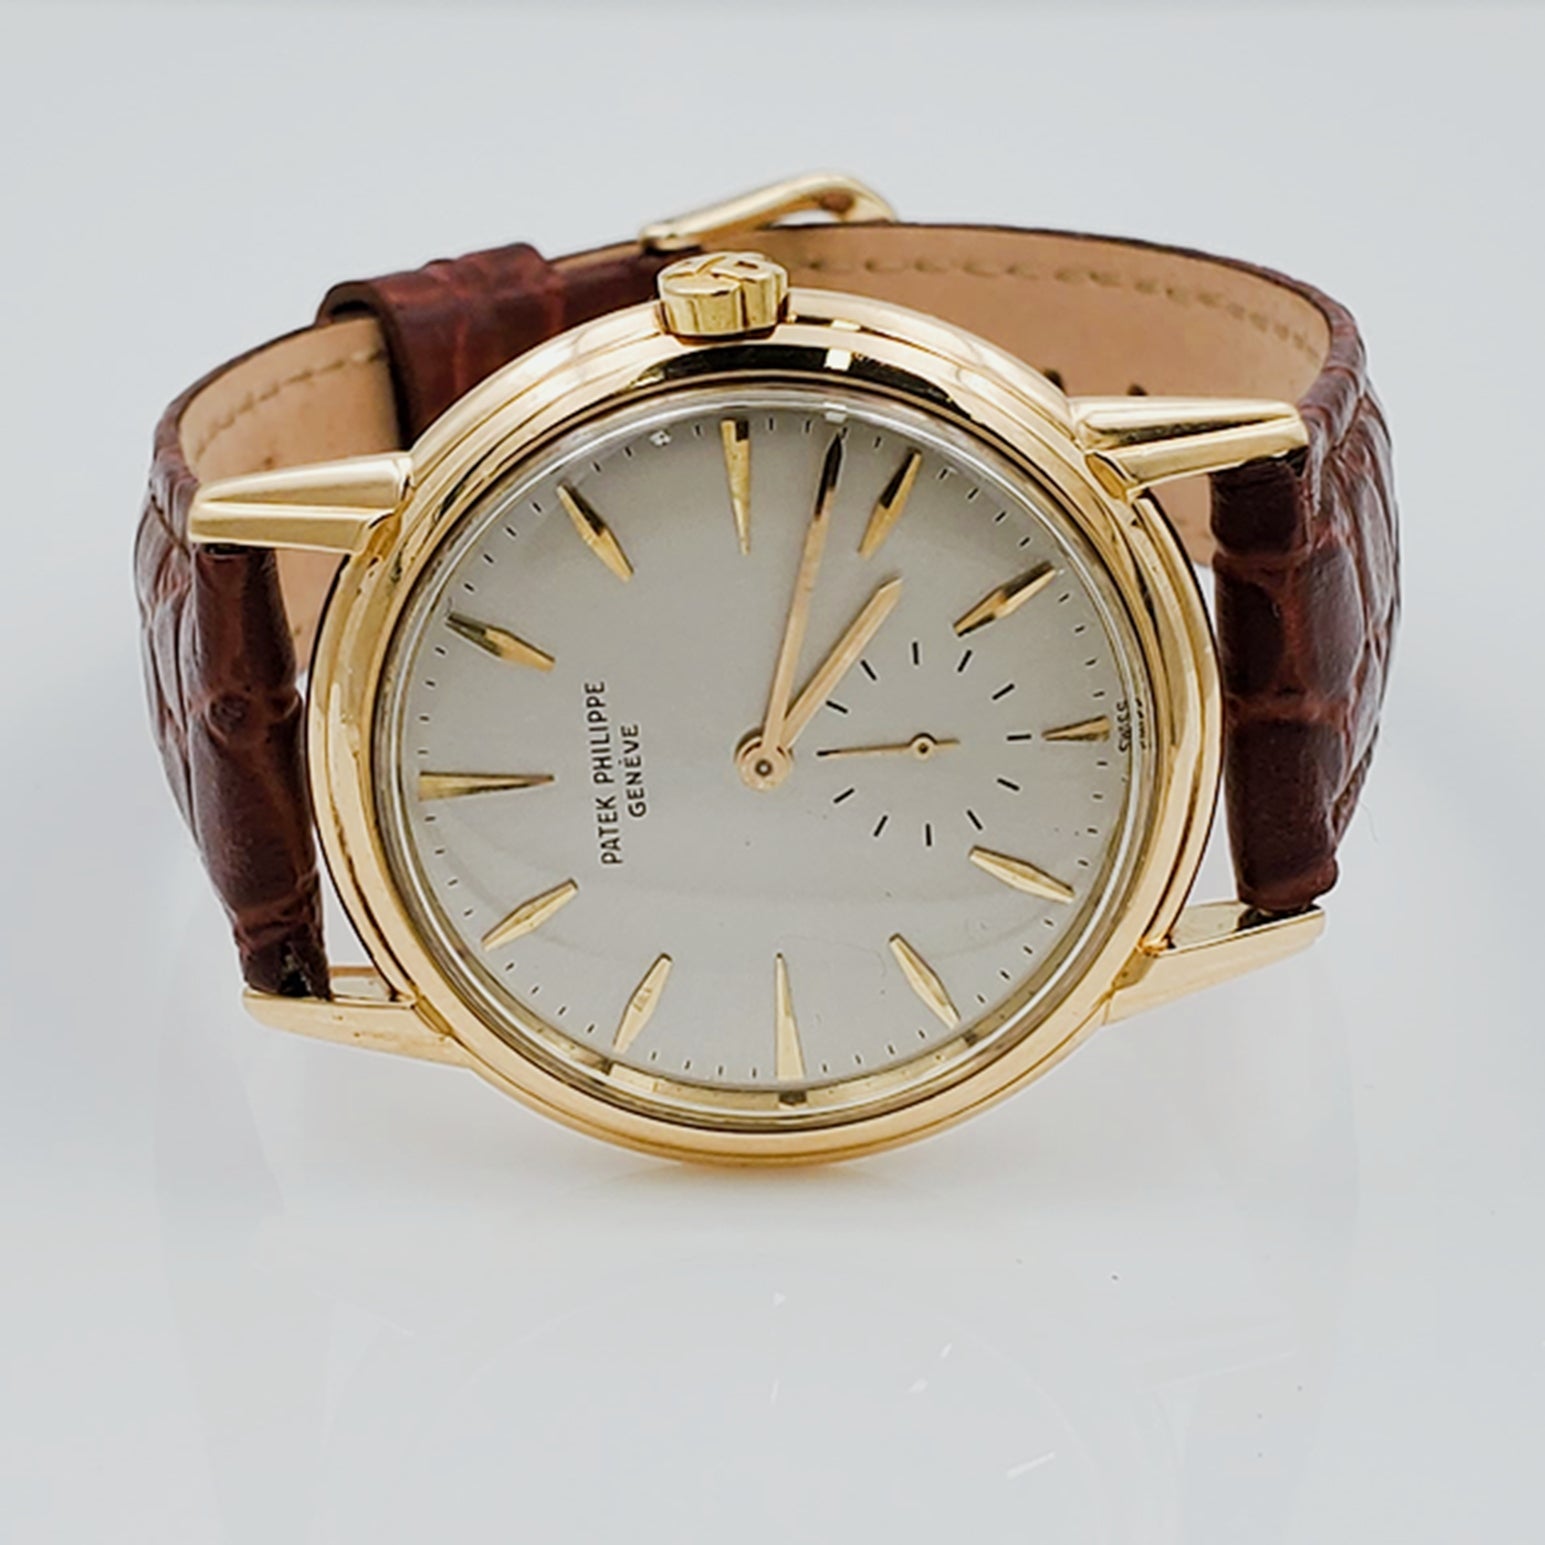 Men's Patek Philippe Calatrava 1961 Vintage 18K Yellow Gold Automatic Wrist Watch with Circa Movements. (Pre-Owned Model 3444)